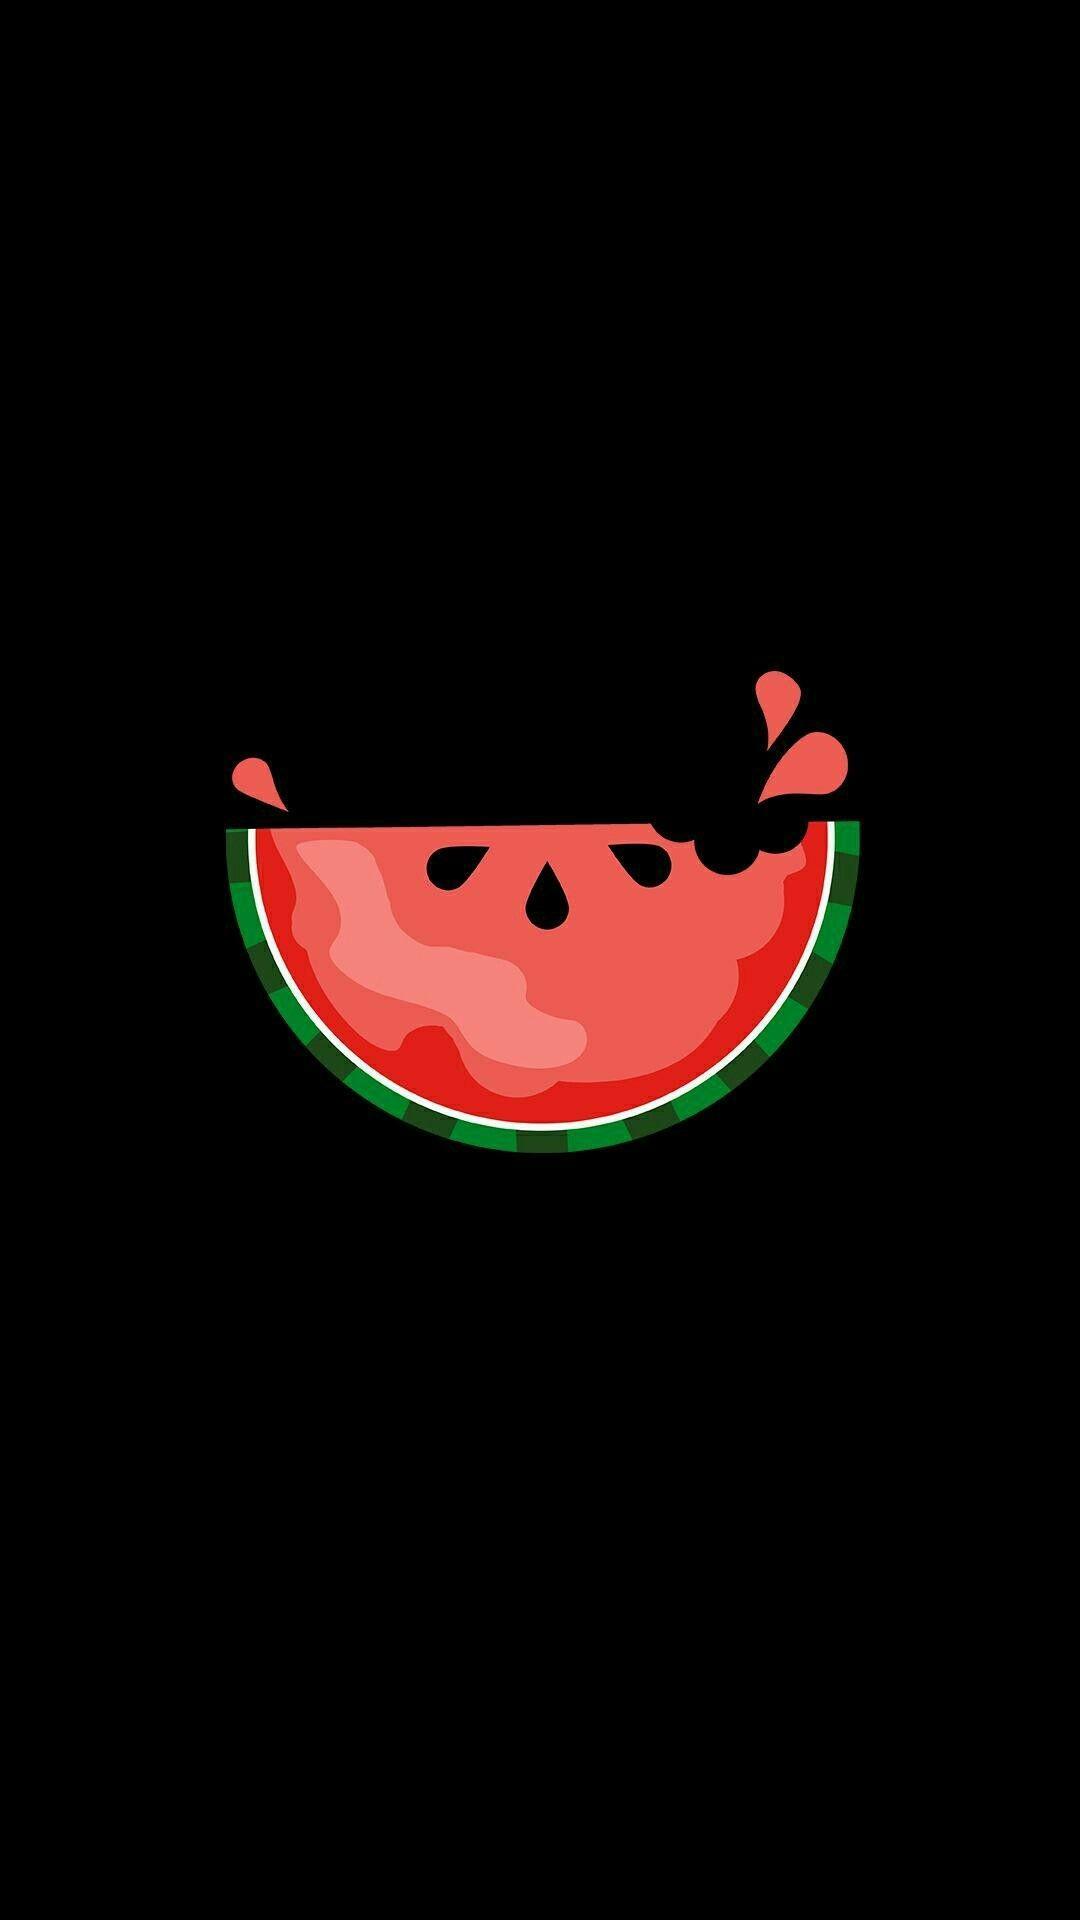 Watermelon Wallpaper For Android Apk